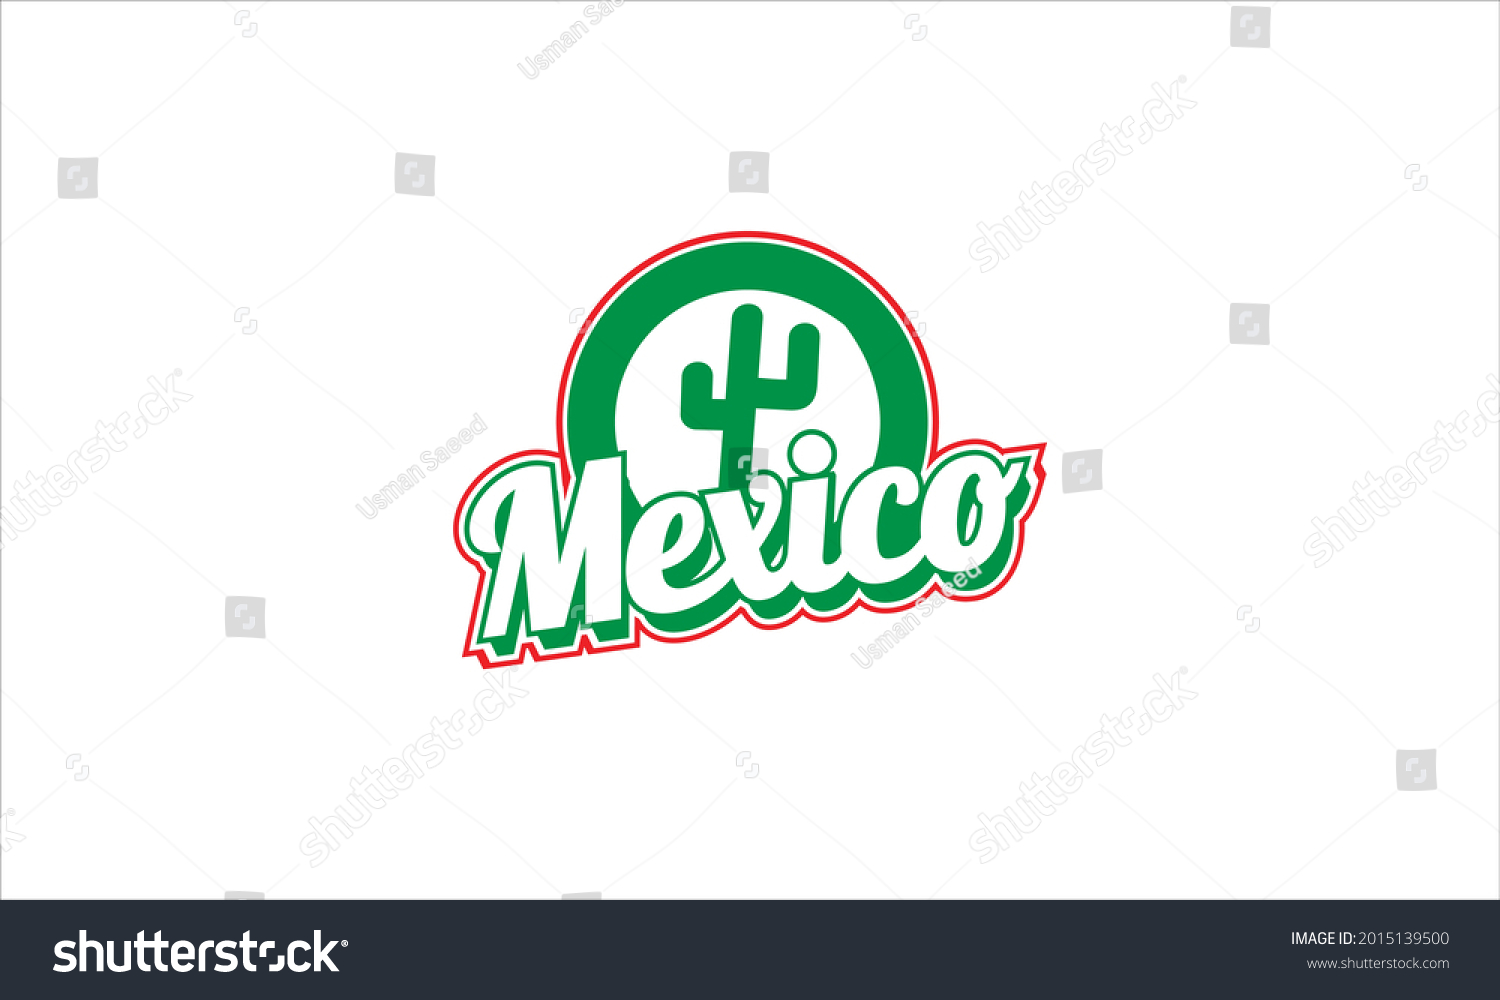 SVG of Green Mexico cactus icon in badge style isolated on white background. Mexico country symbol stock vector illustration symbol svg